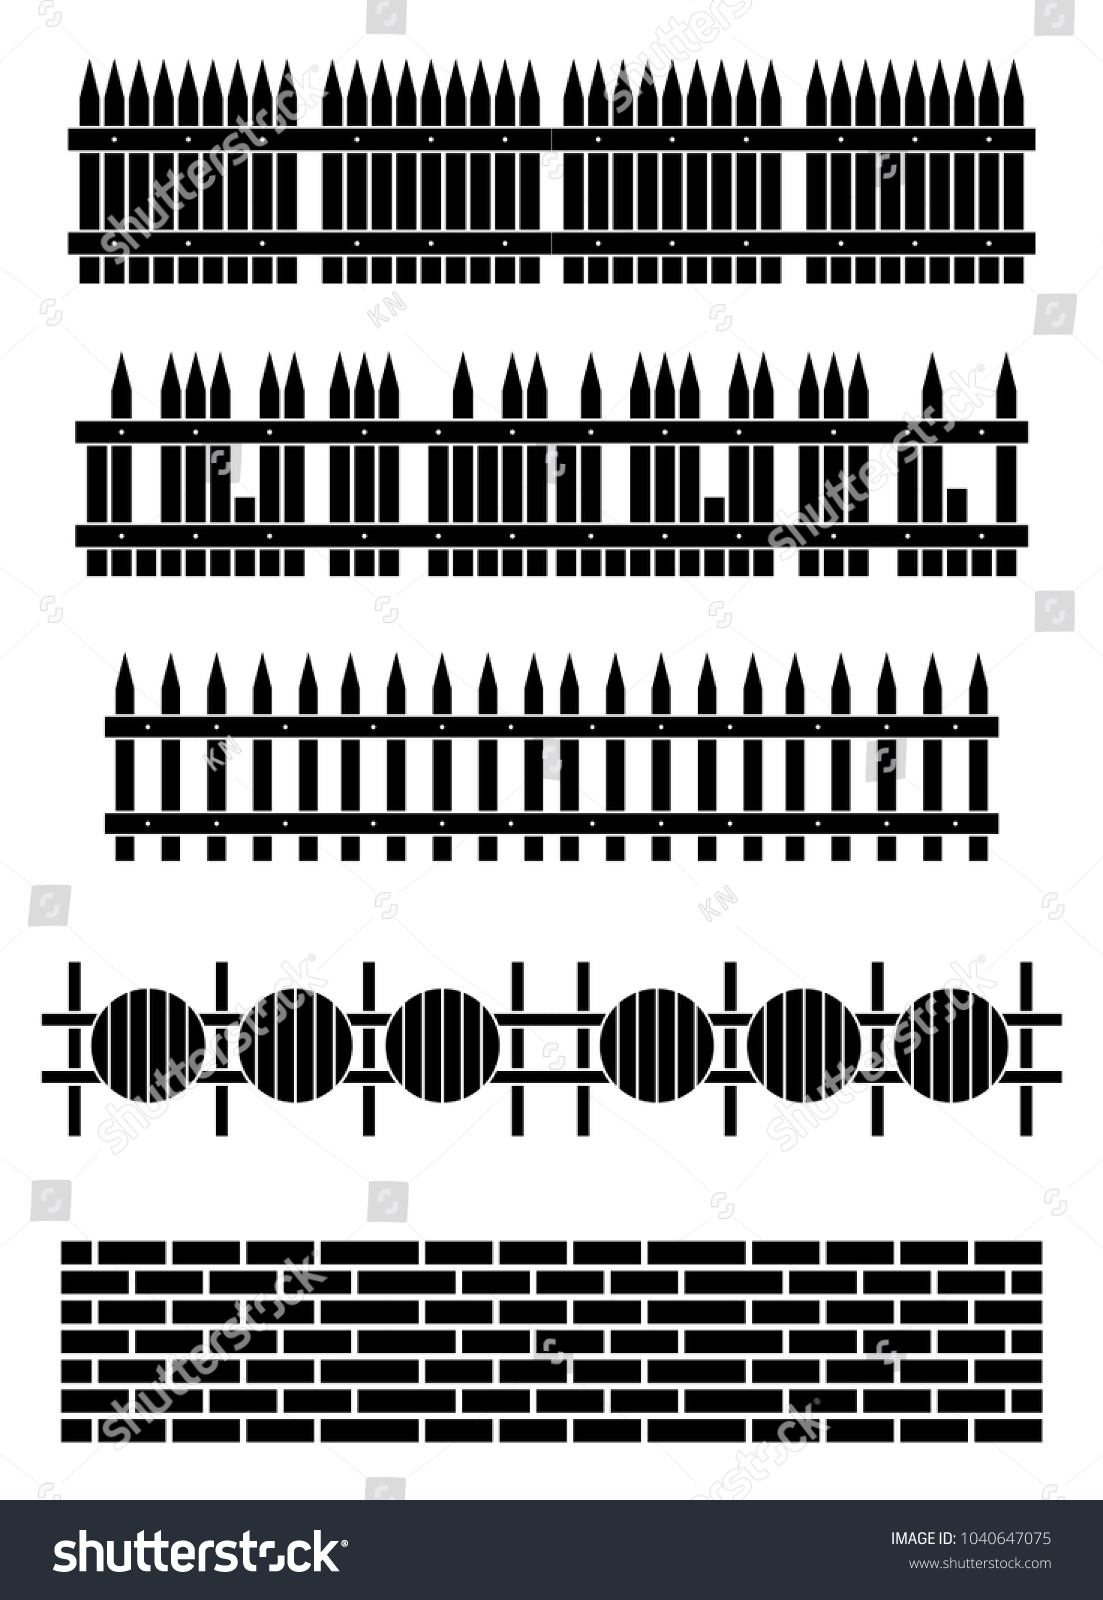 Silhouette Wooden Fence Set Vector Illustration Stock Vector (Royalty ...